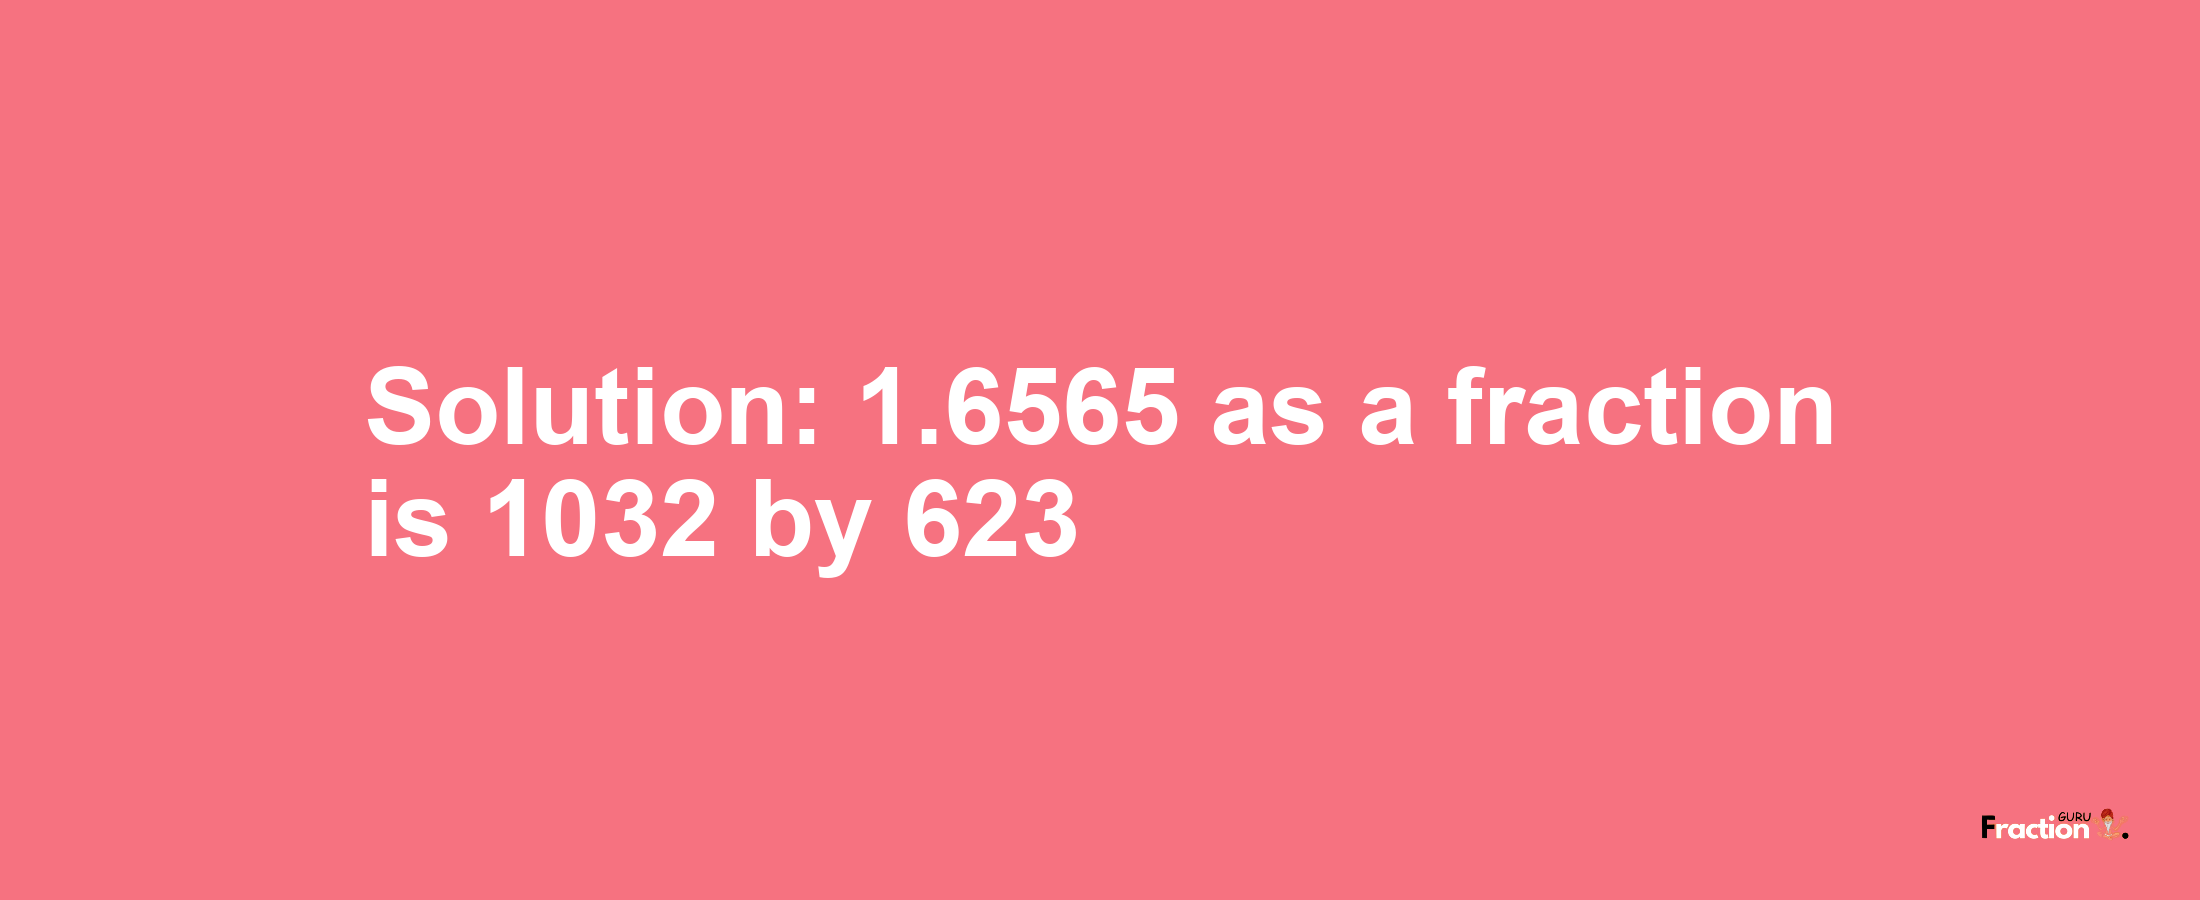 Solution:1.6565 as a fraction is 1032/623